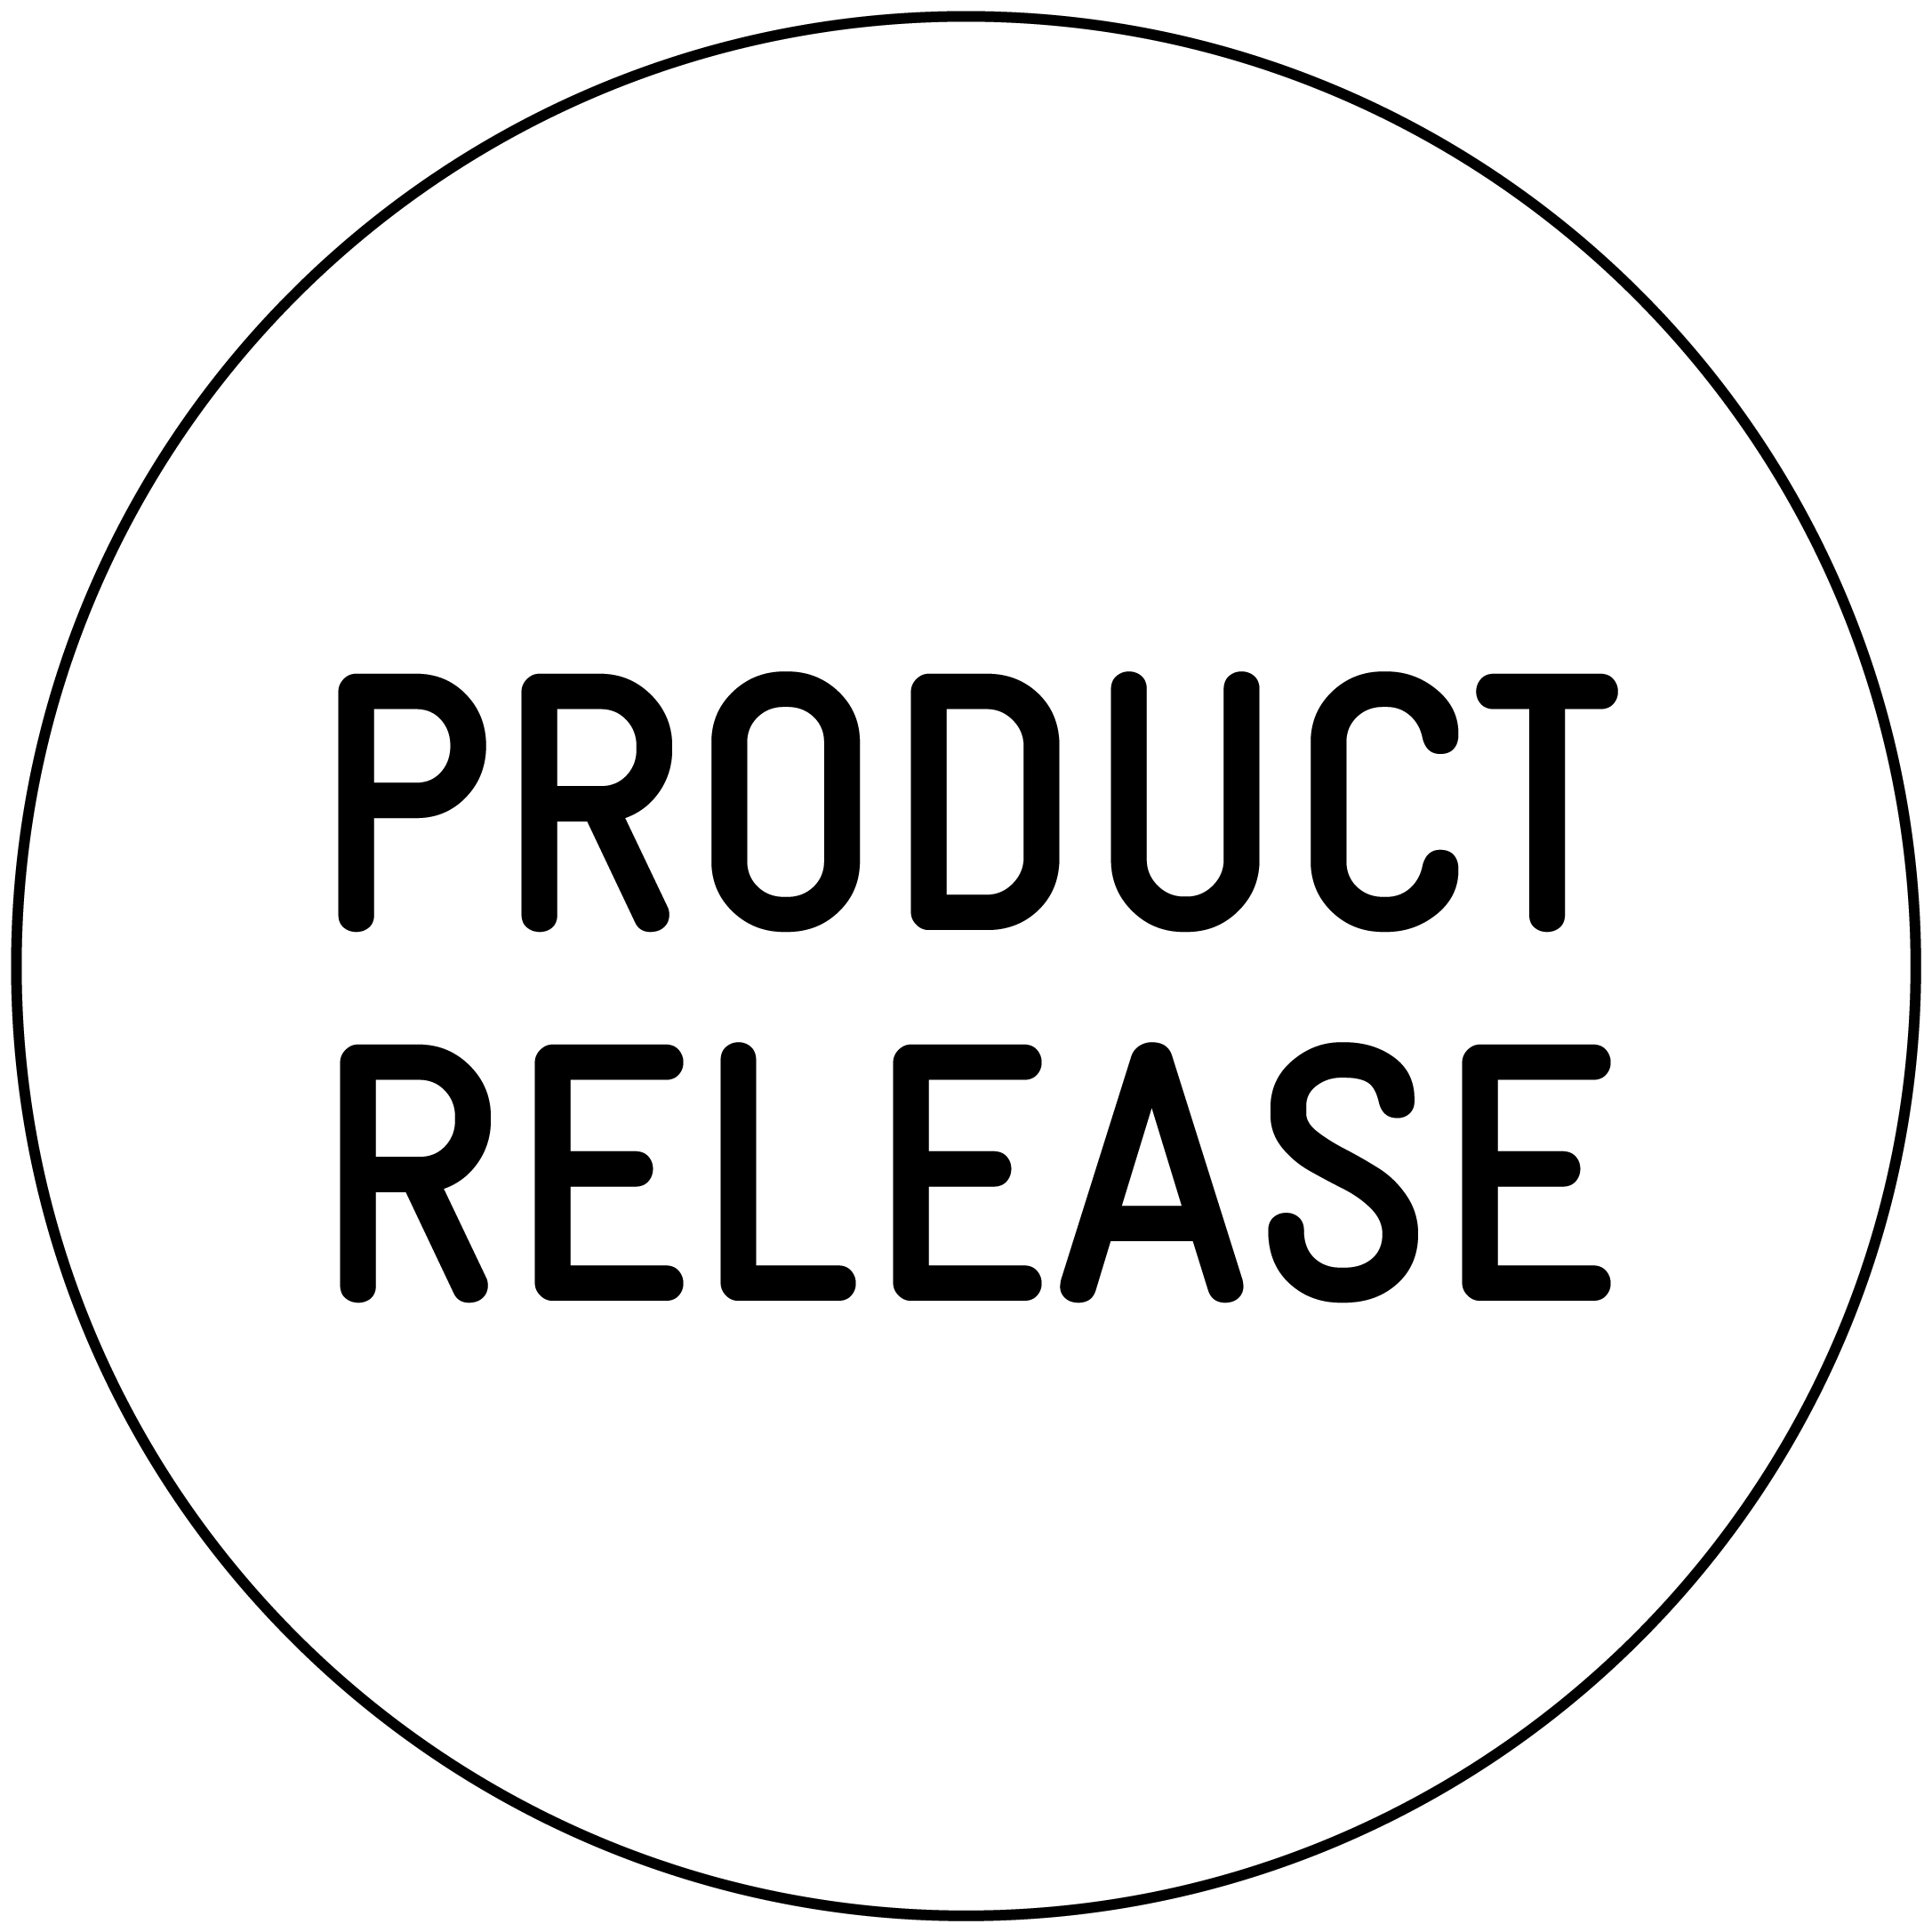 PRODUCT RELEASE